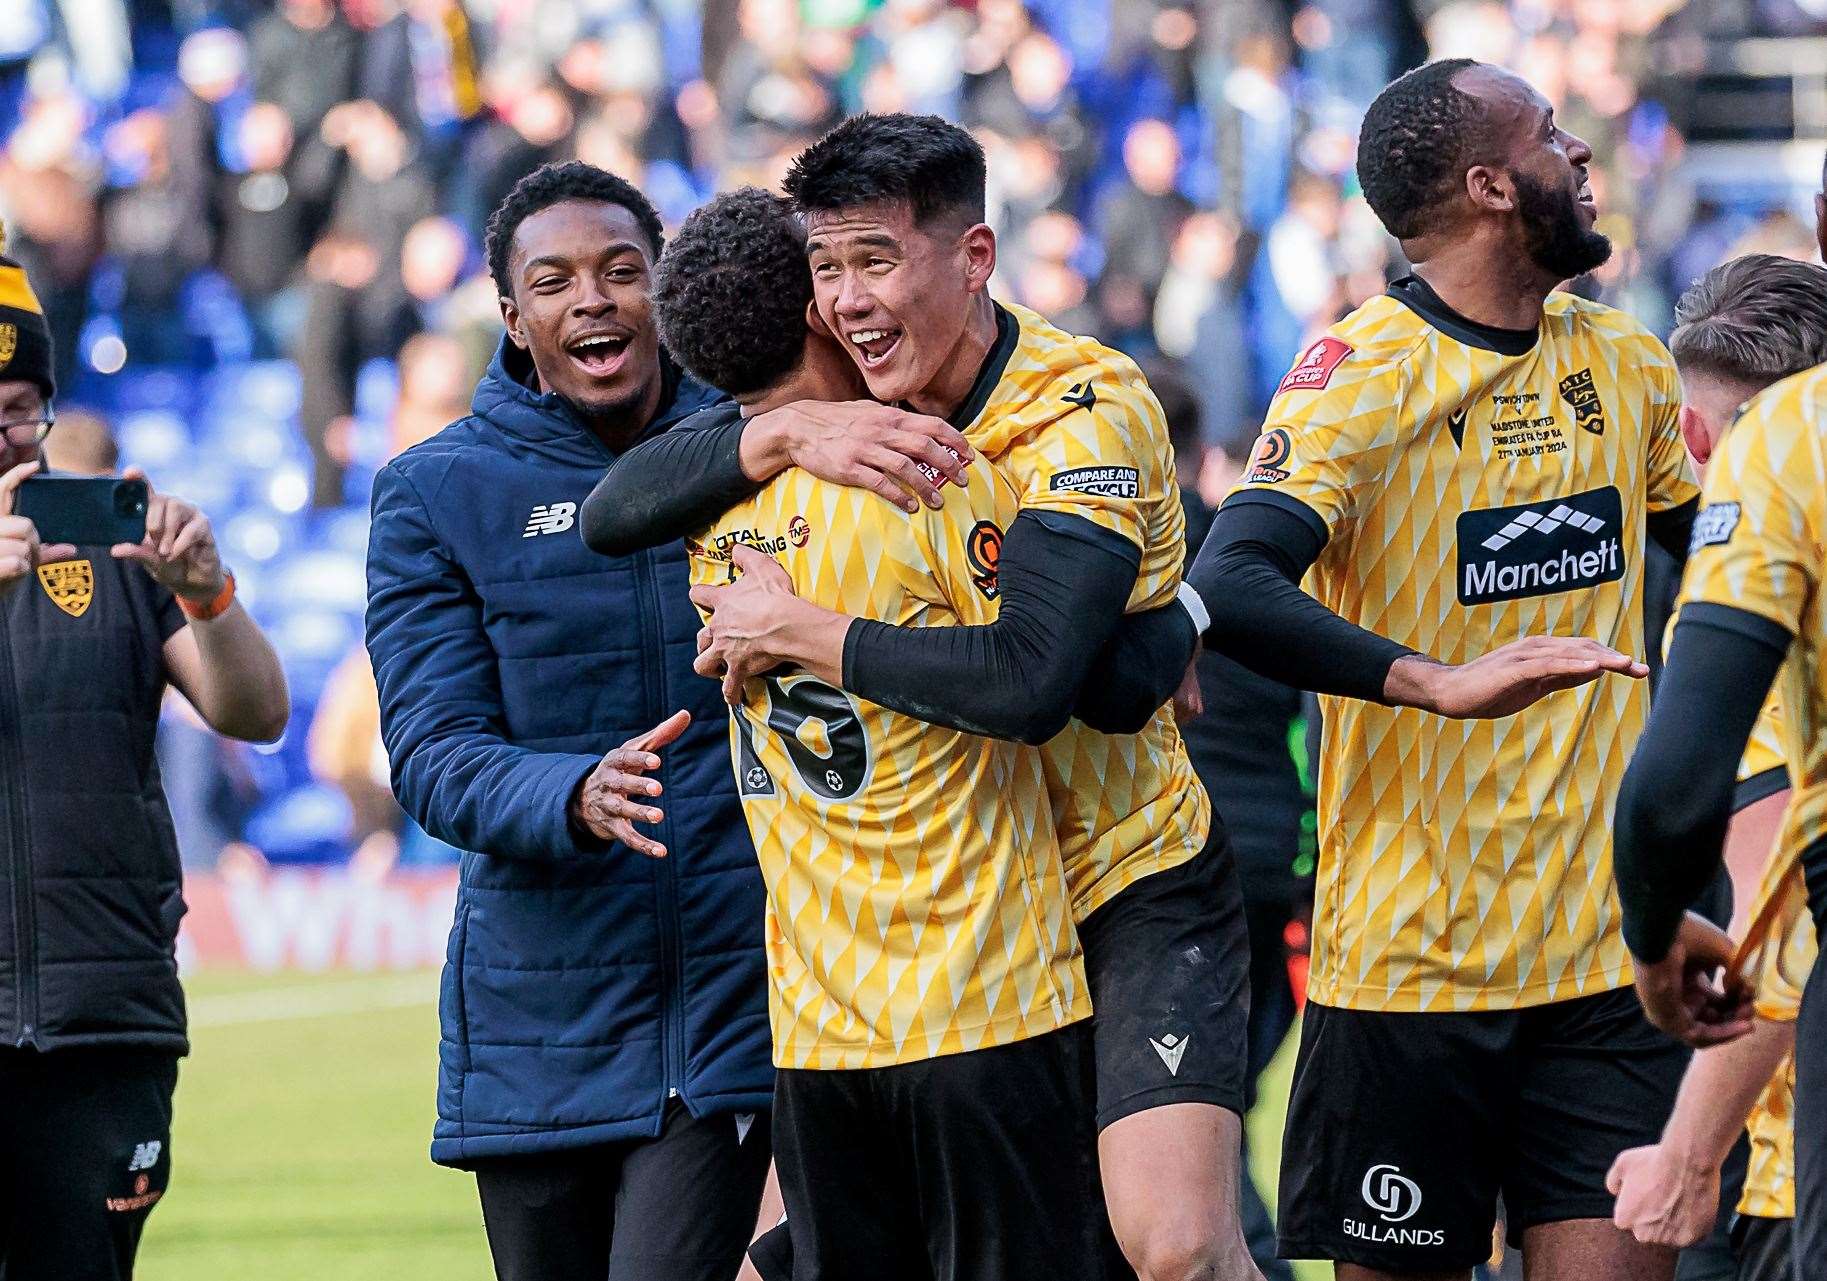 Bivesh Gurung embraces Liam Sole after Maidstone's FA Cup win at Ipswich. Picture: Helen Cooper